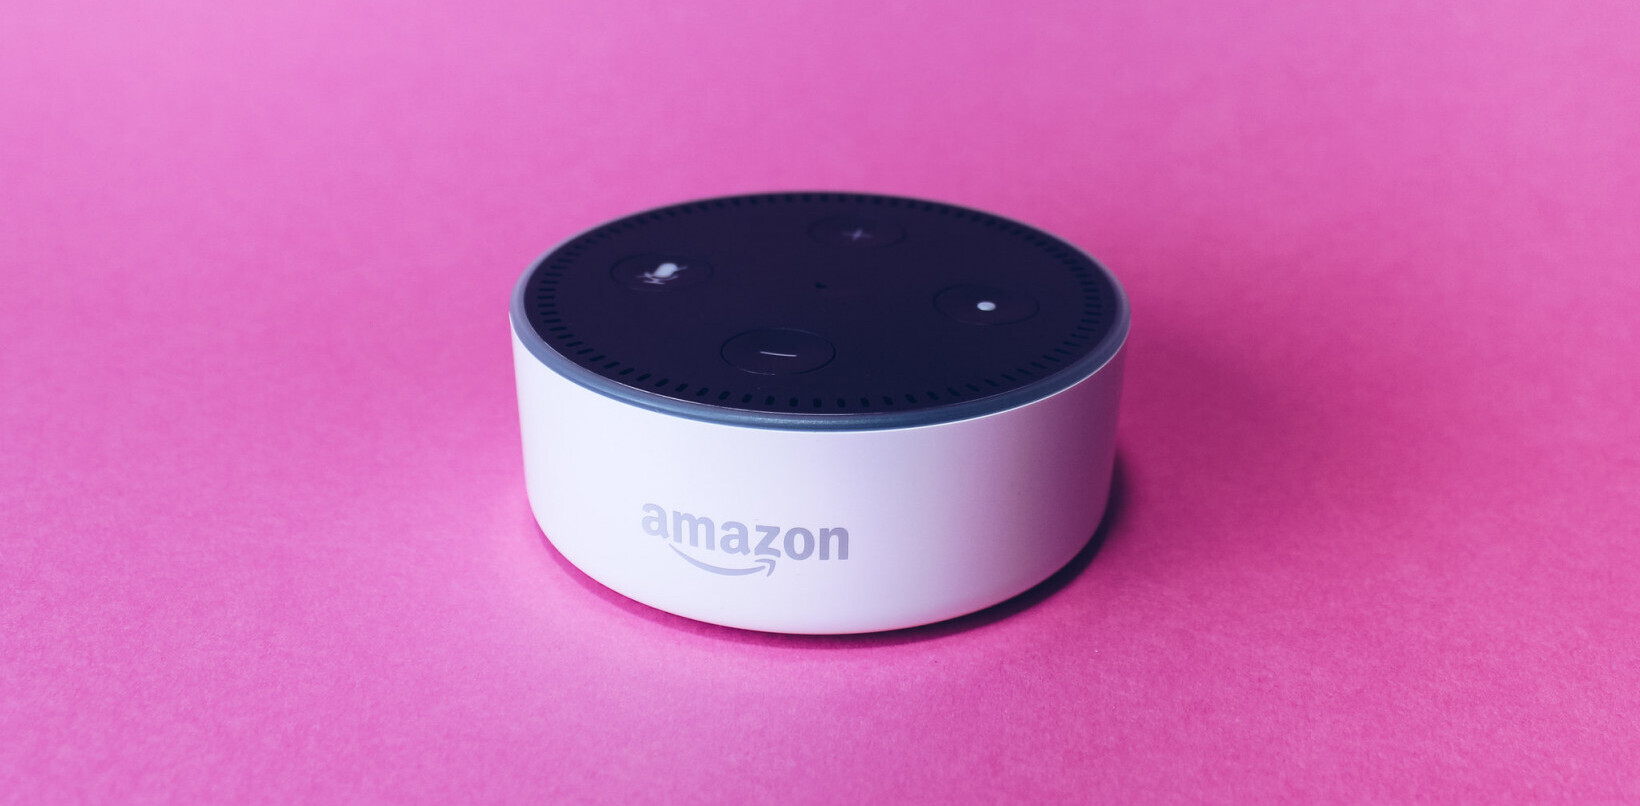 Amazon Echo and Google Home could monitor your heartbeat without even touching you